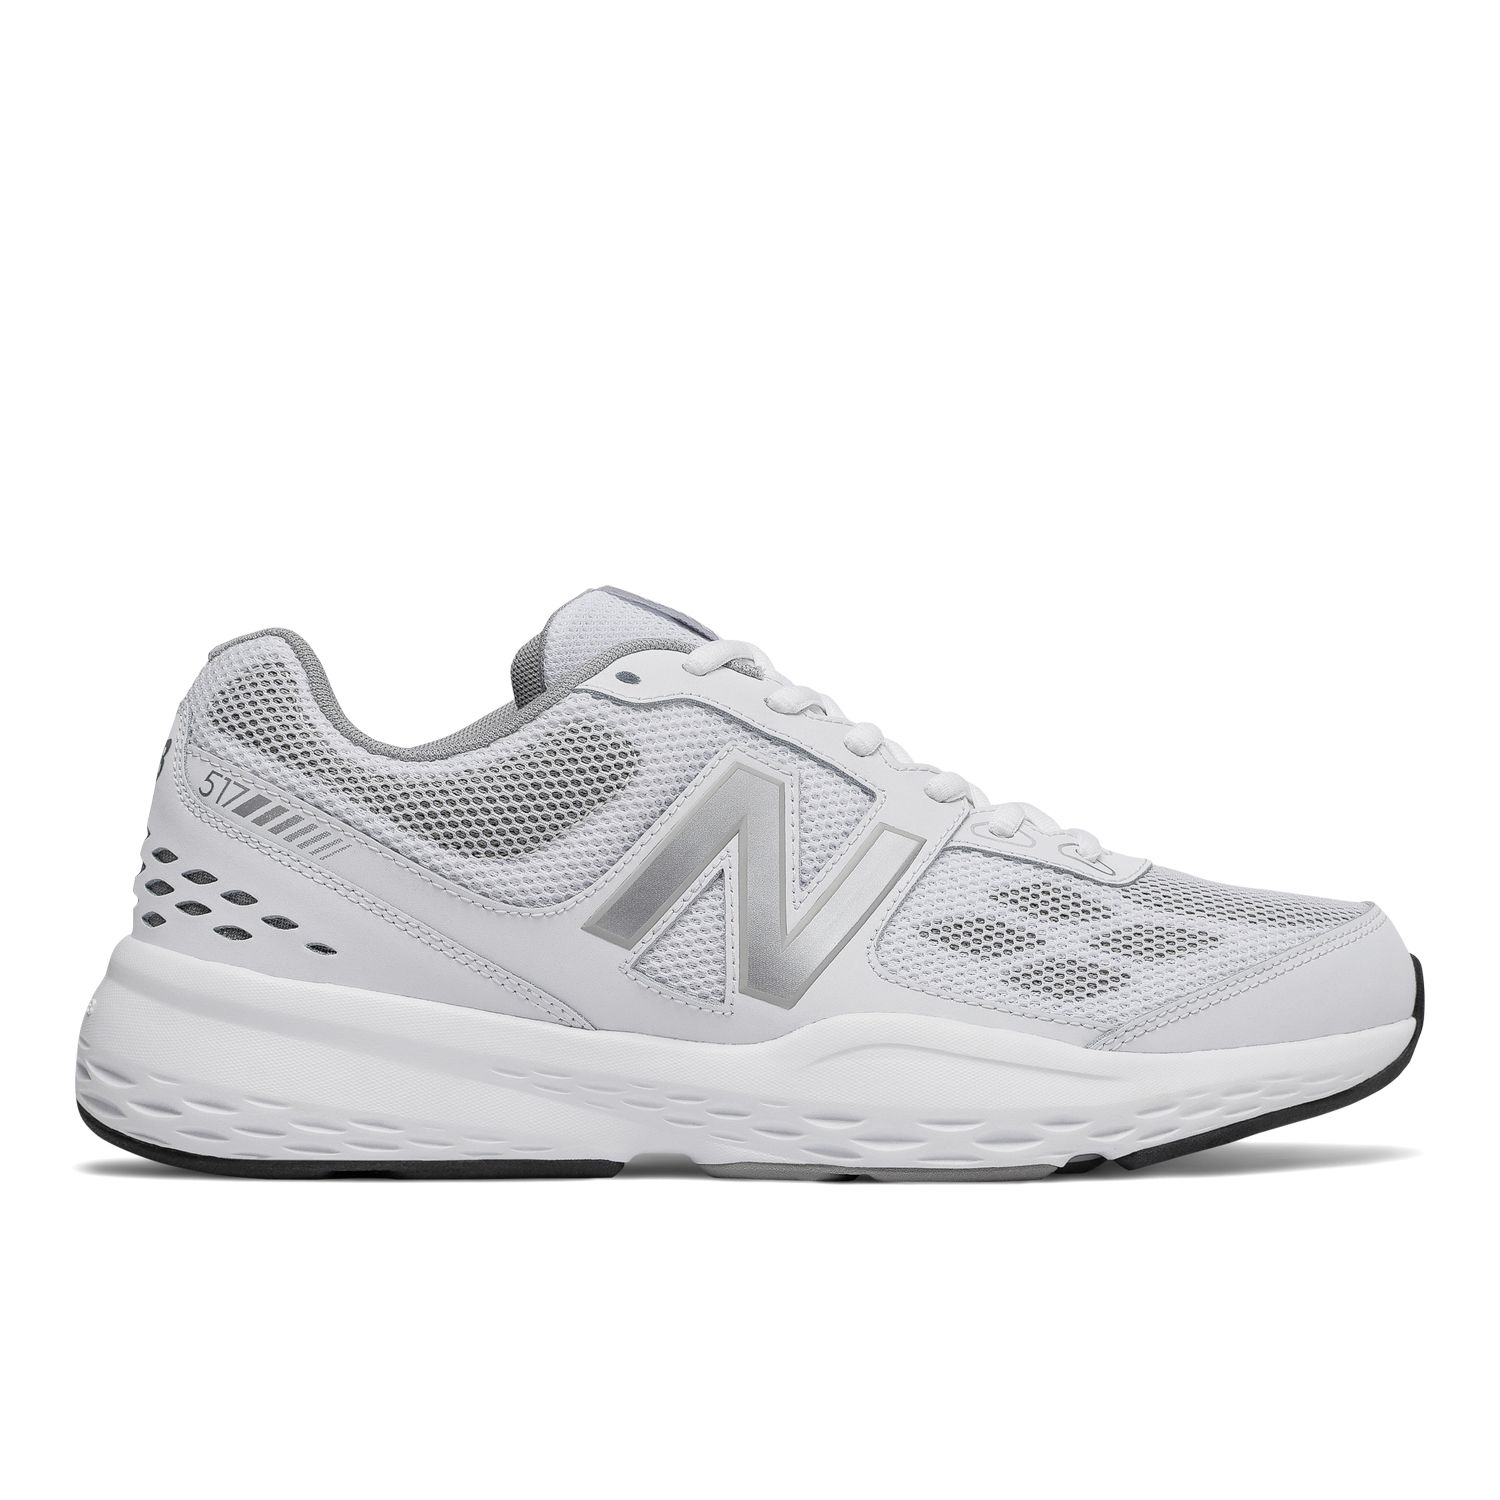 nb 517 review